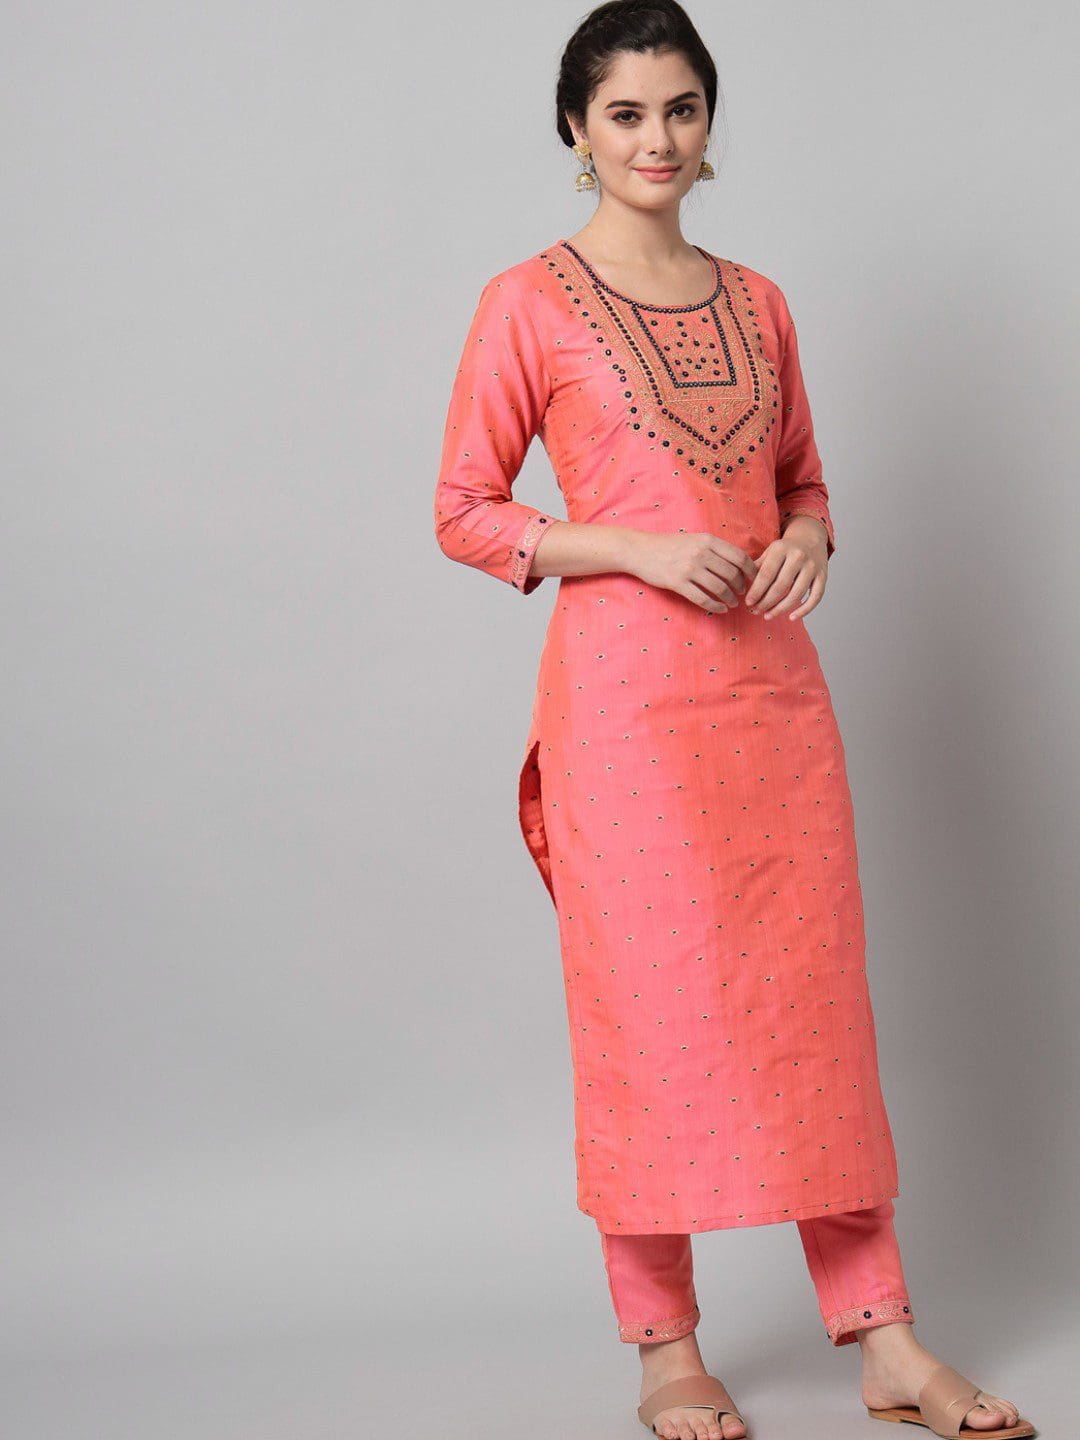 Charming Color Light Pink And Black Shades Embroidered Print Kurta Trousers Set And Dupatta For Women